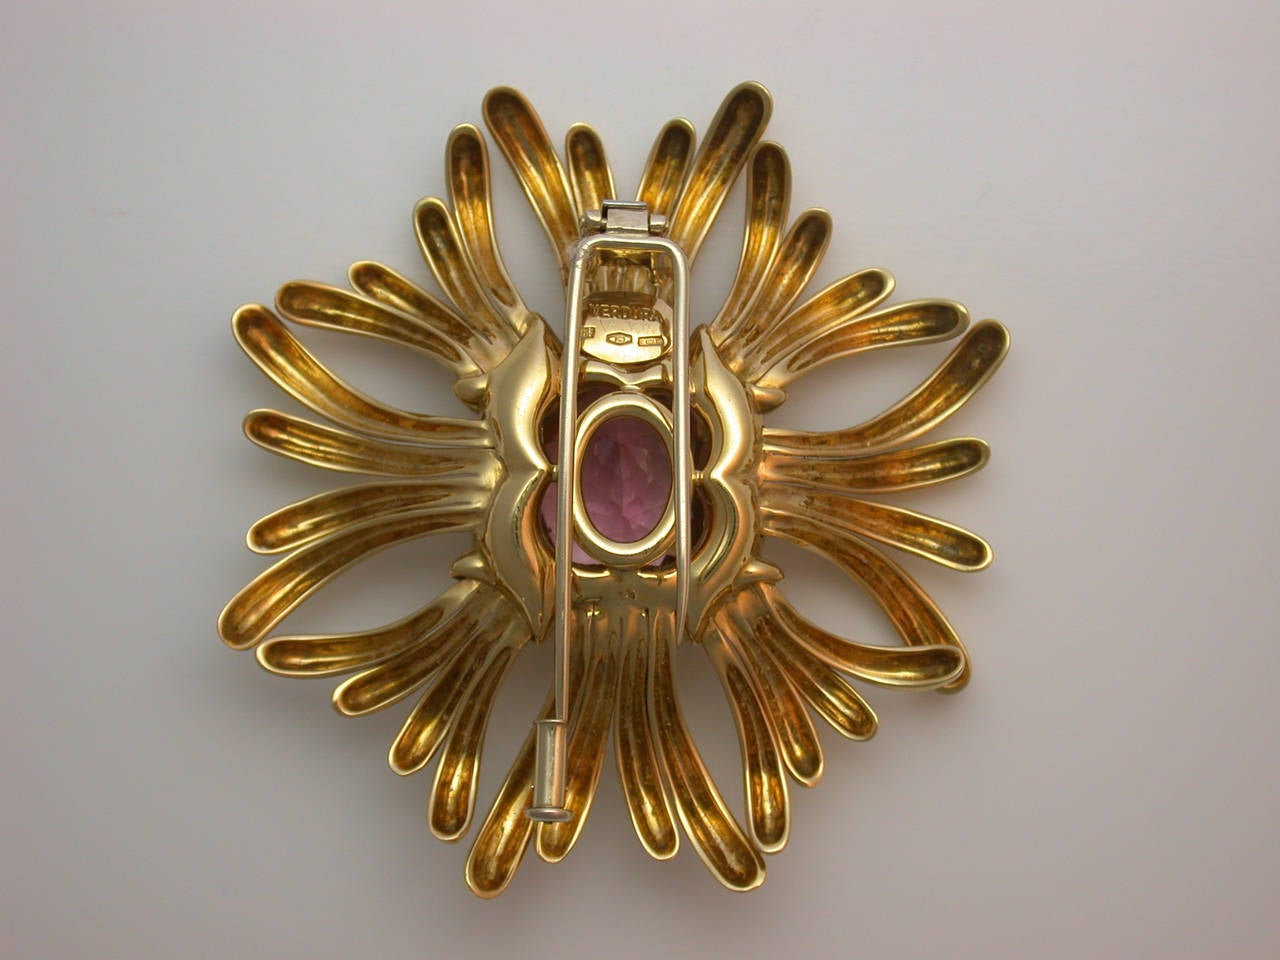 A lovely vintage brooch centering a faceted cushion-cut pink tourmaline, a bright, lively stone weighing approximately 20.95 carats, emanating polished yellow gold rays, with hinged double pin clip back and safety catch, signed Verdura, stamped 750